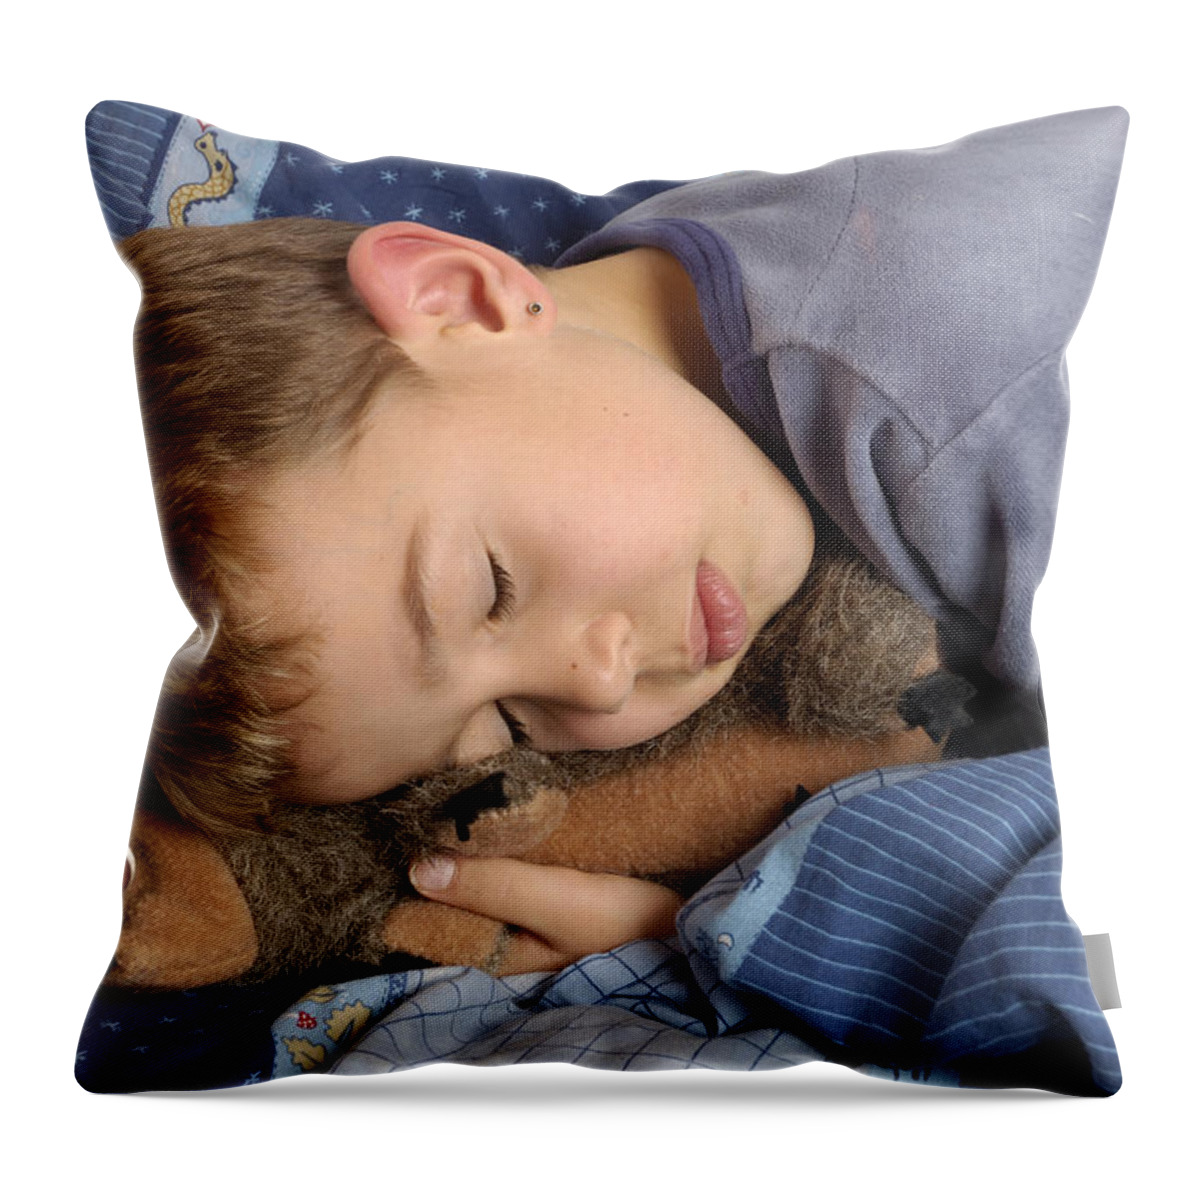 Sleeping Throw Pillow featuring the photograph Sleeping child by Matthias Hauser